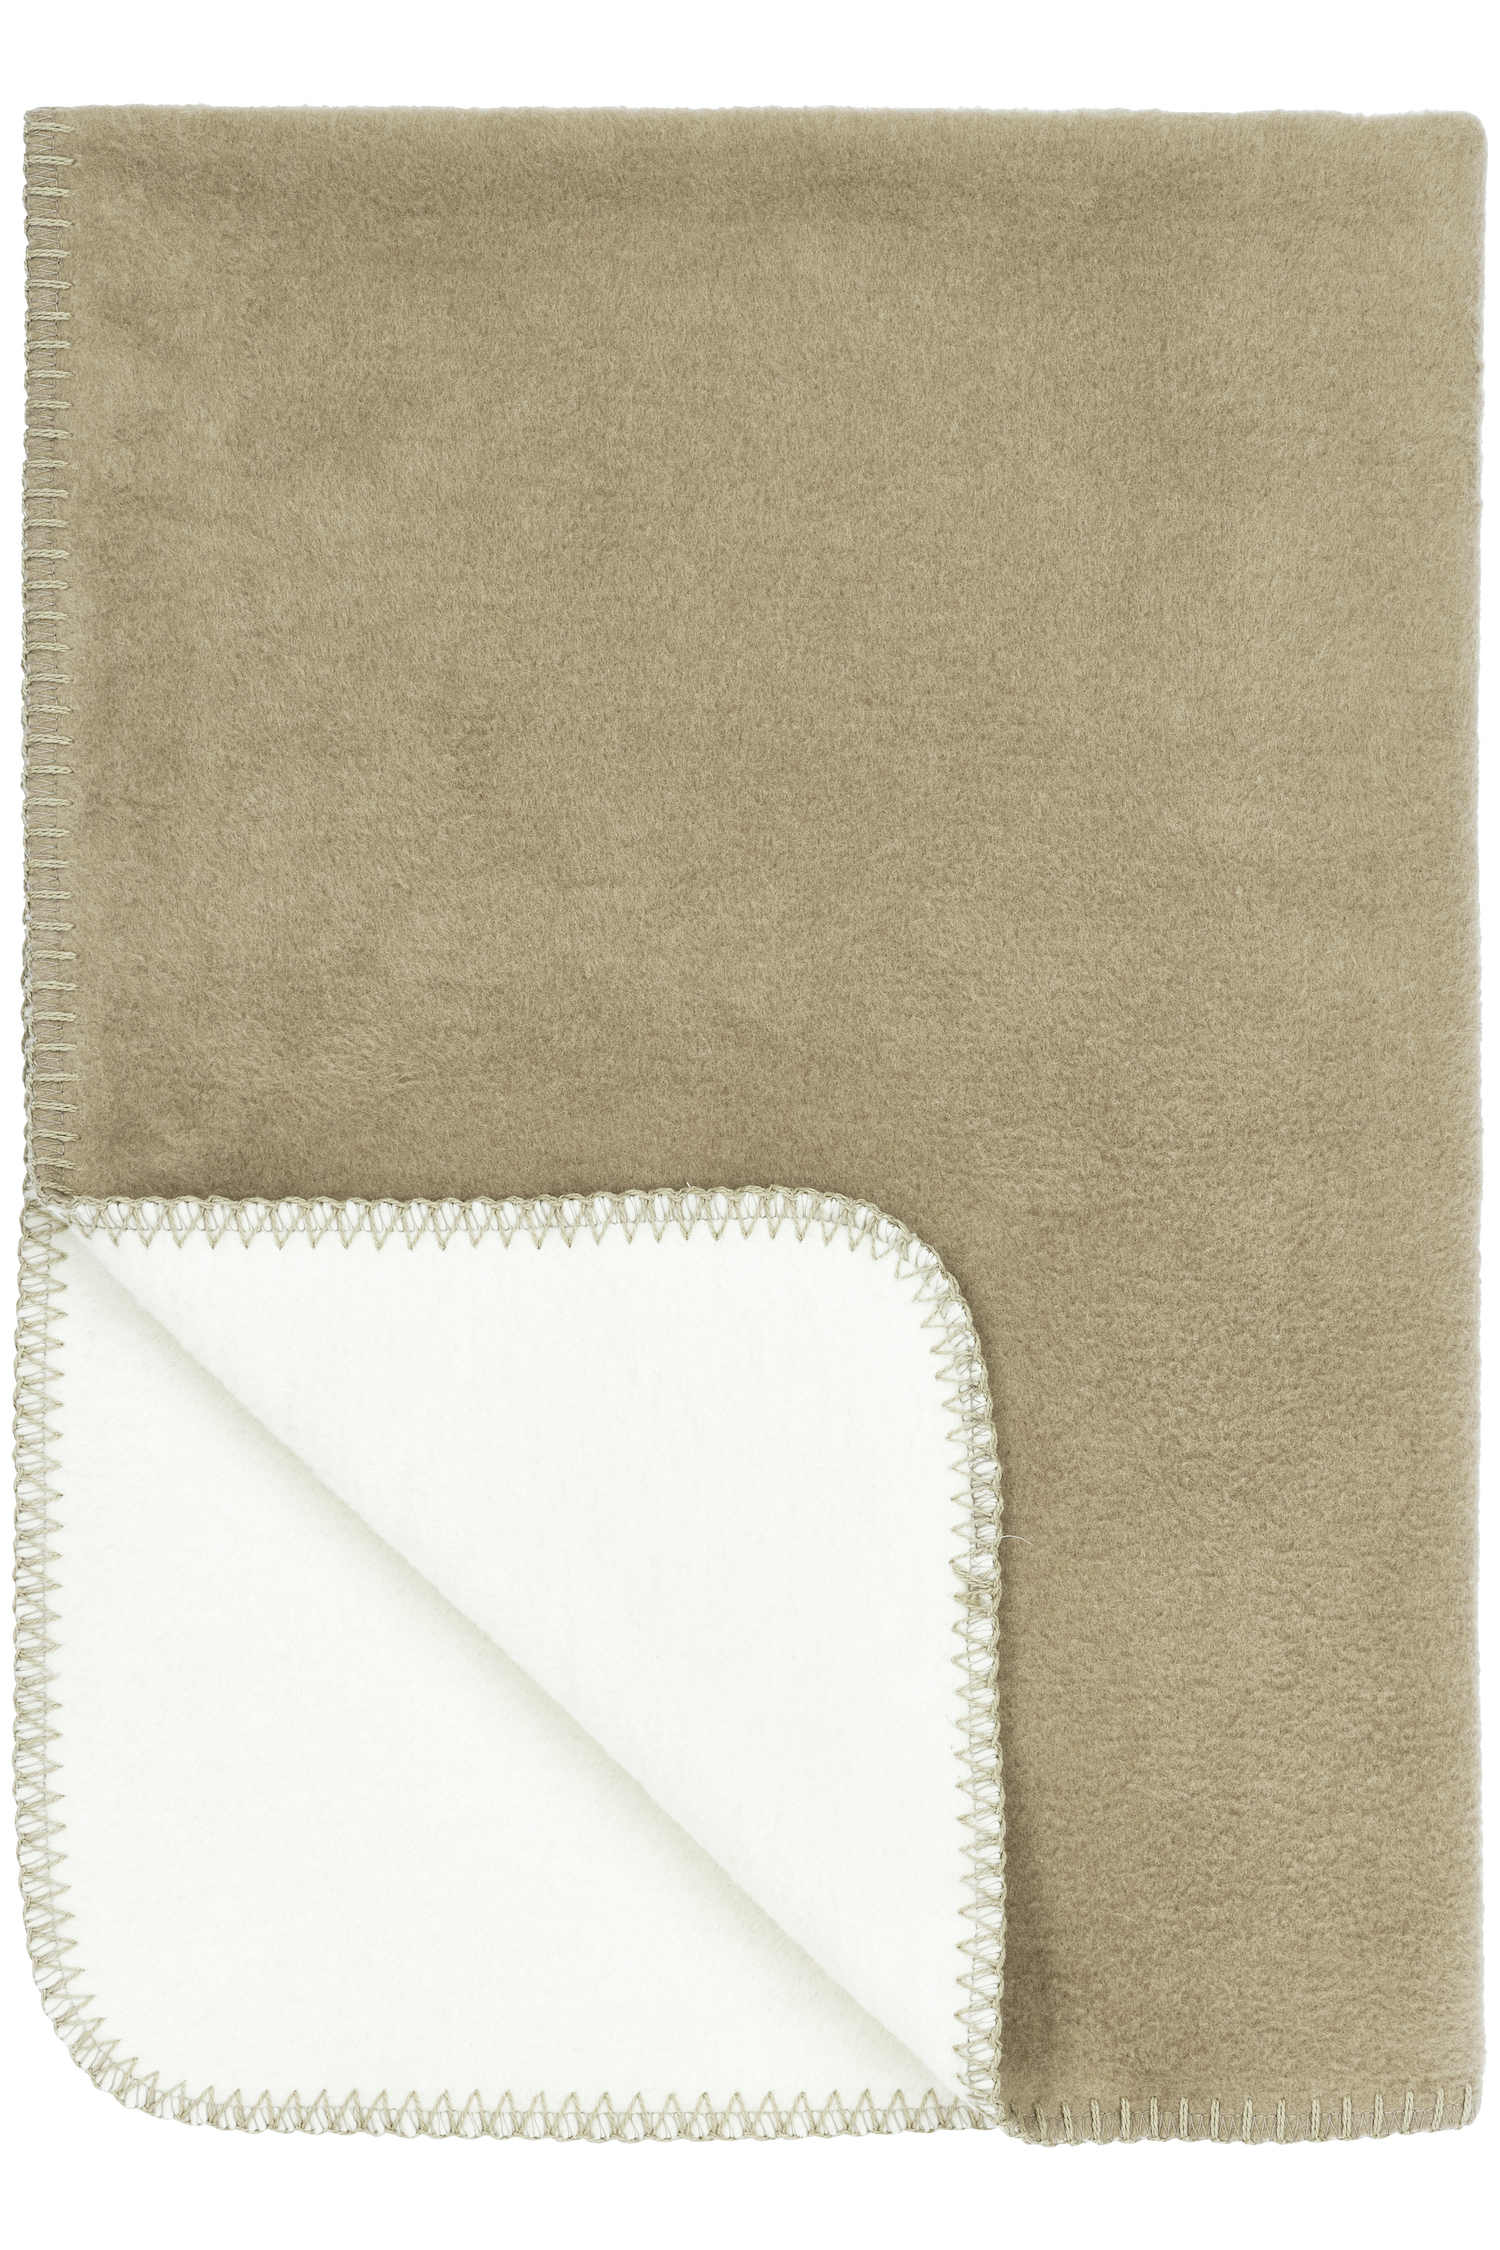 Crib Blanket Double Face - Taupe/Offwhite - 75x100cm